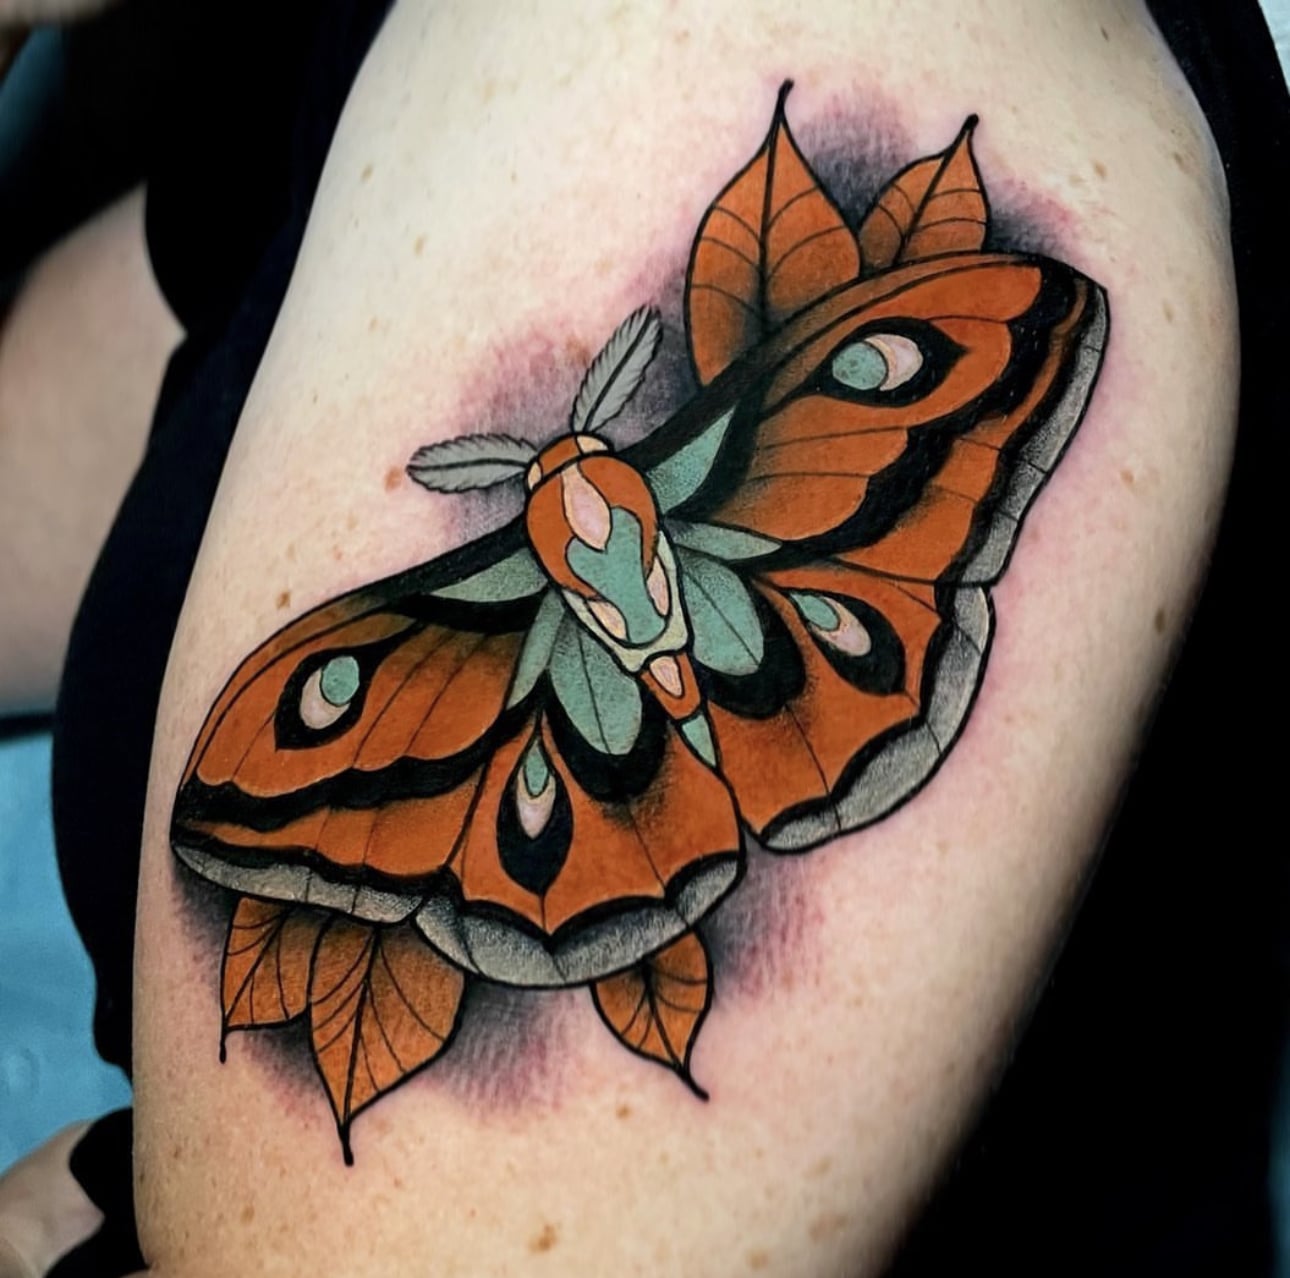 How to Decorate a Tattoo Studio - The Daily Guardian